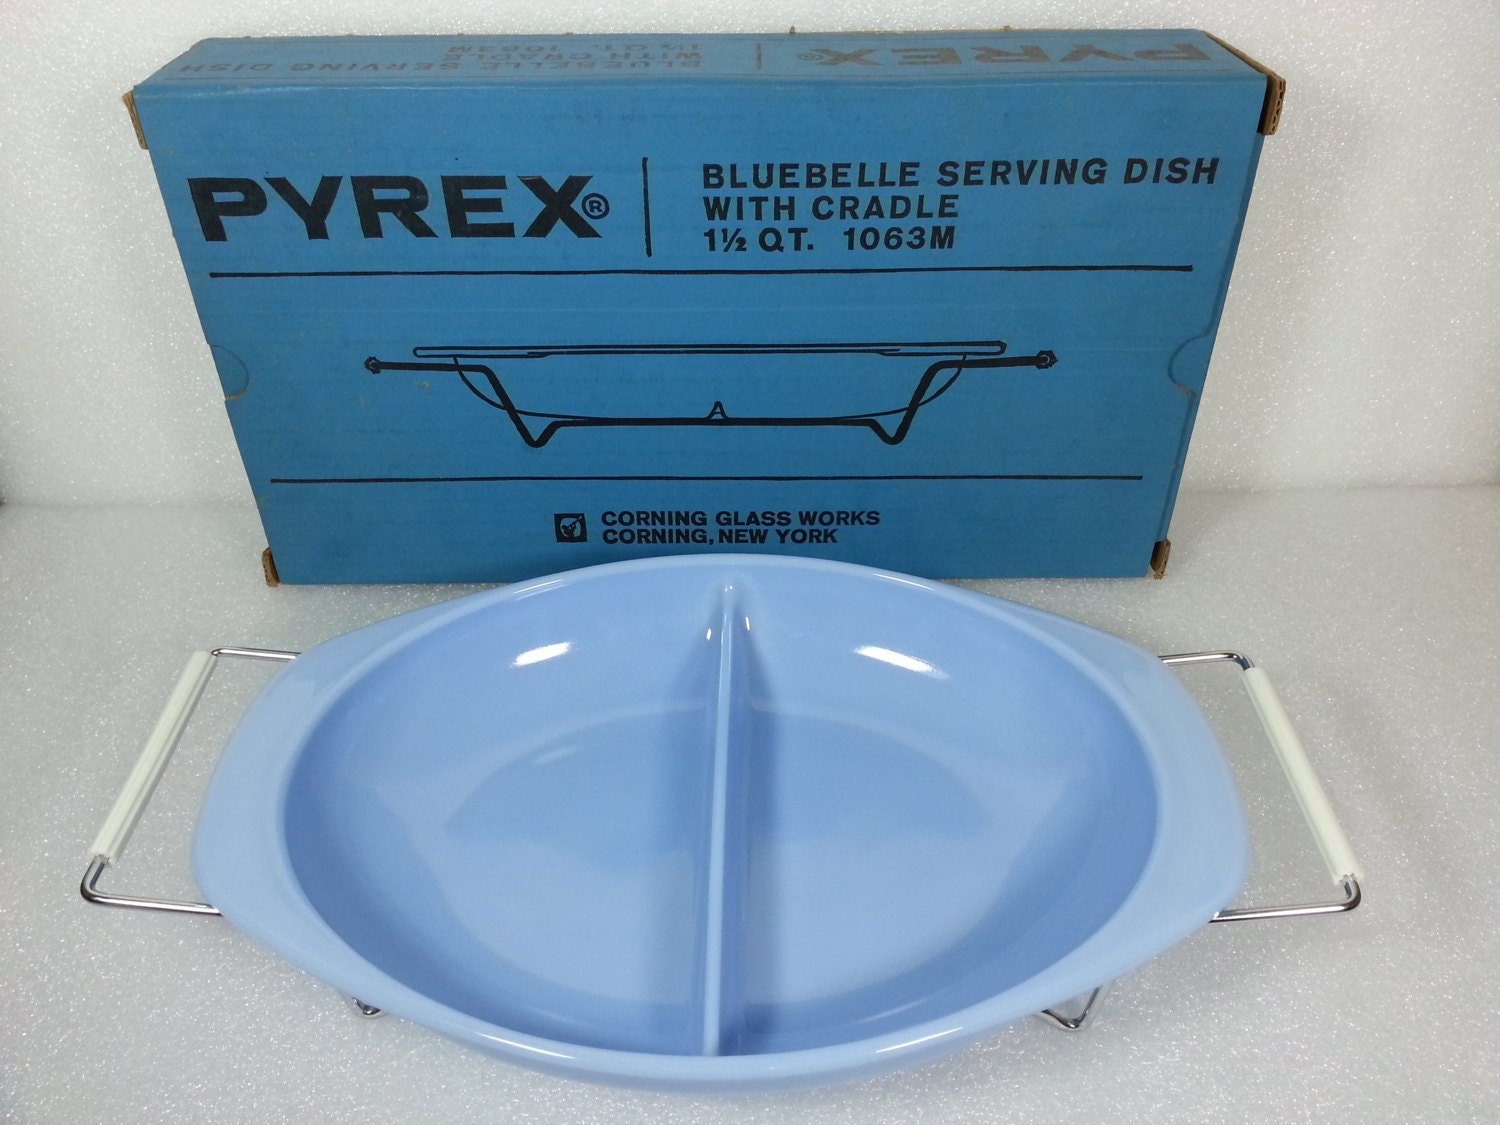 Vintage Pyrex Delphite Blue Oval Divided Dish WITH 2 Handled Stand In Box - MINT